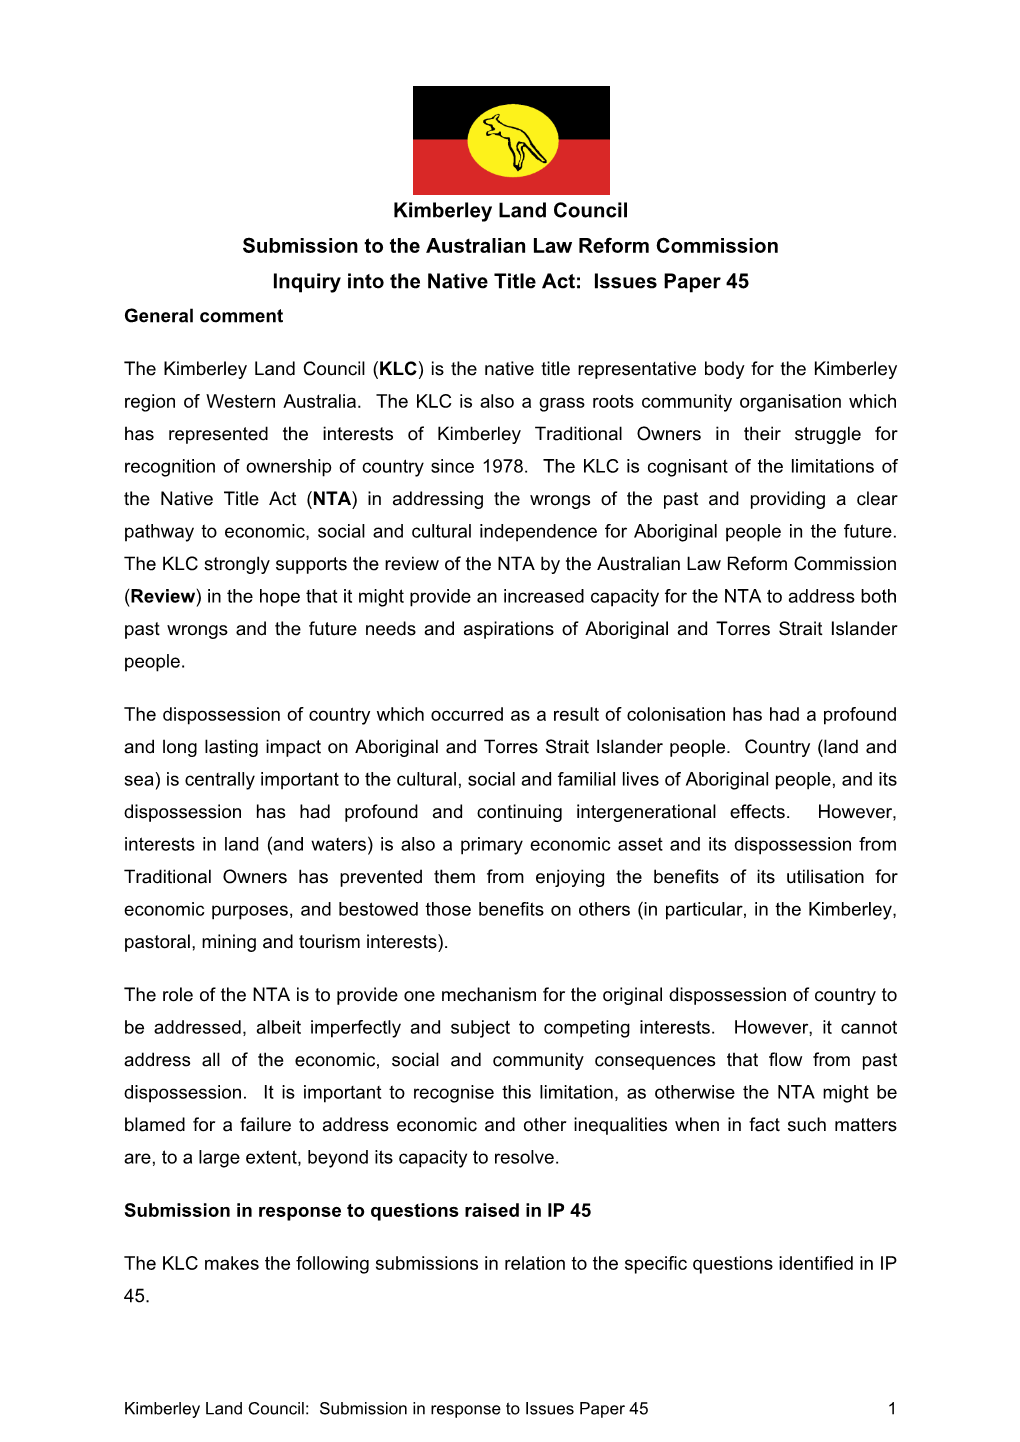 Kimberley Land Council Submission to the Australian Law Reform Commission Inquiry Into the Native Title Act: Issues Paper 45 General Comment